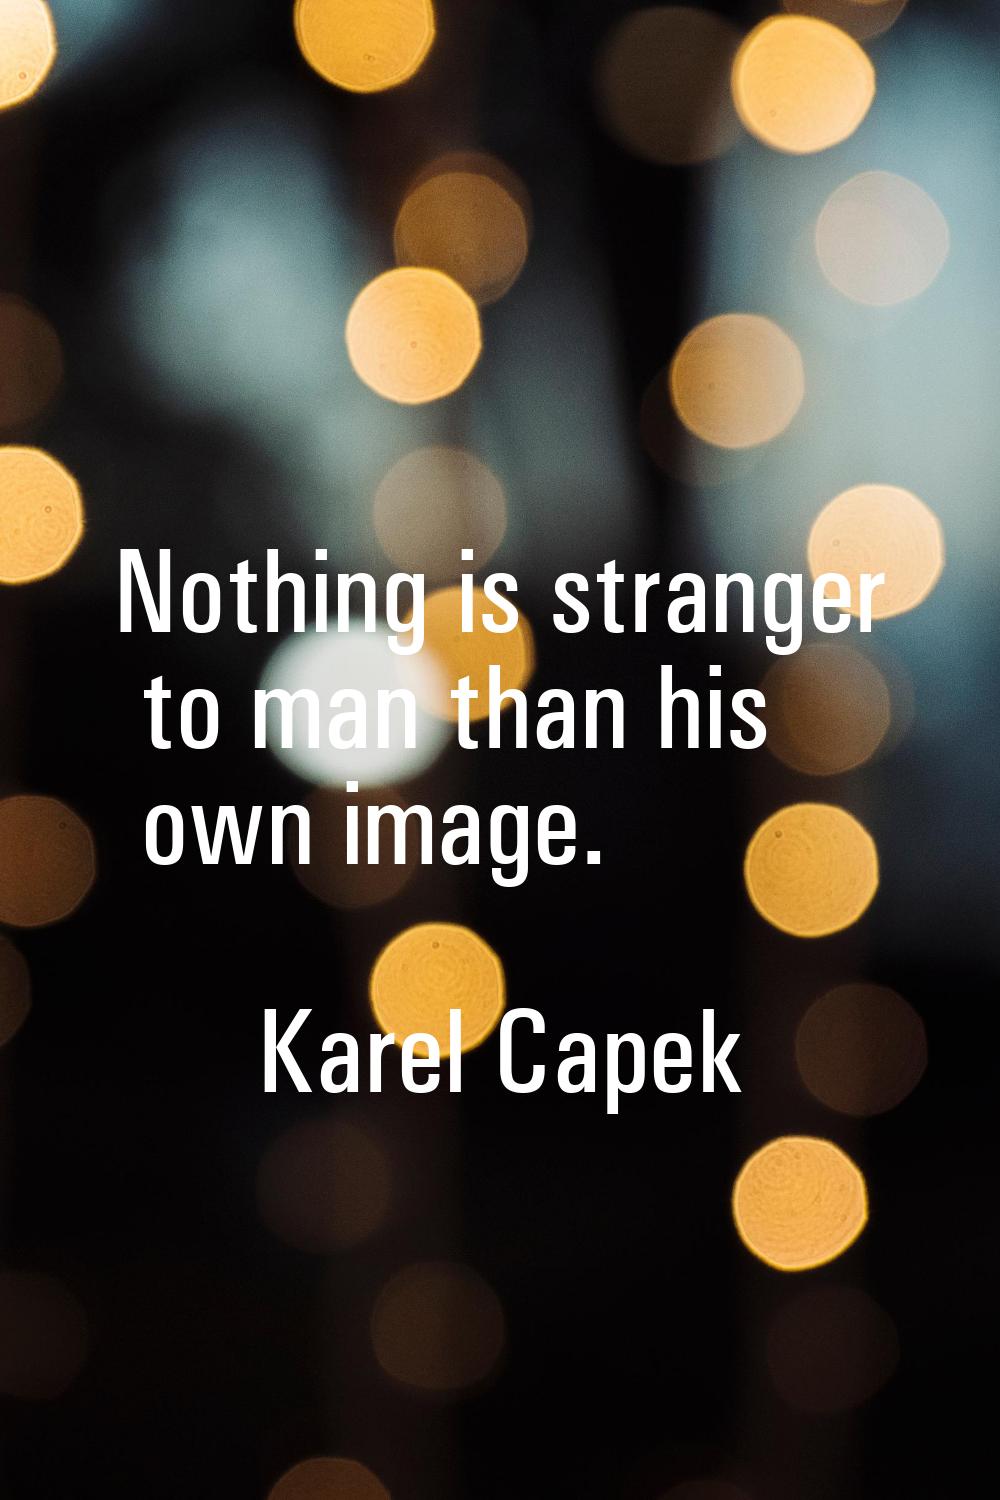 Nothing is stranger to man than his own image.